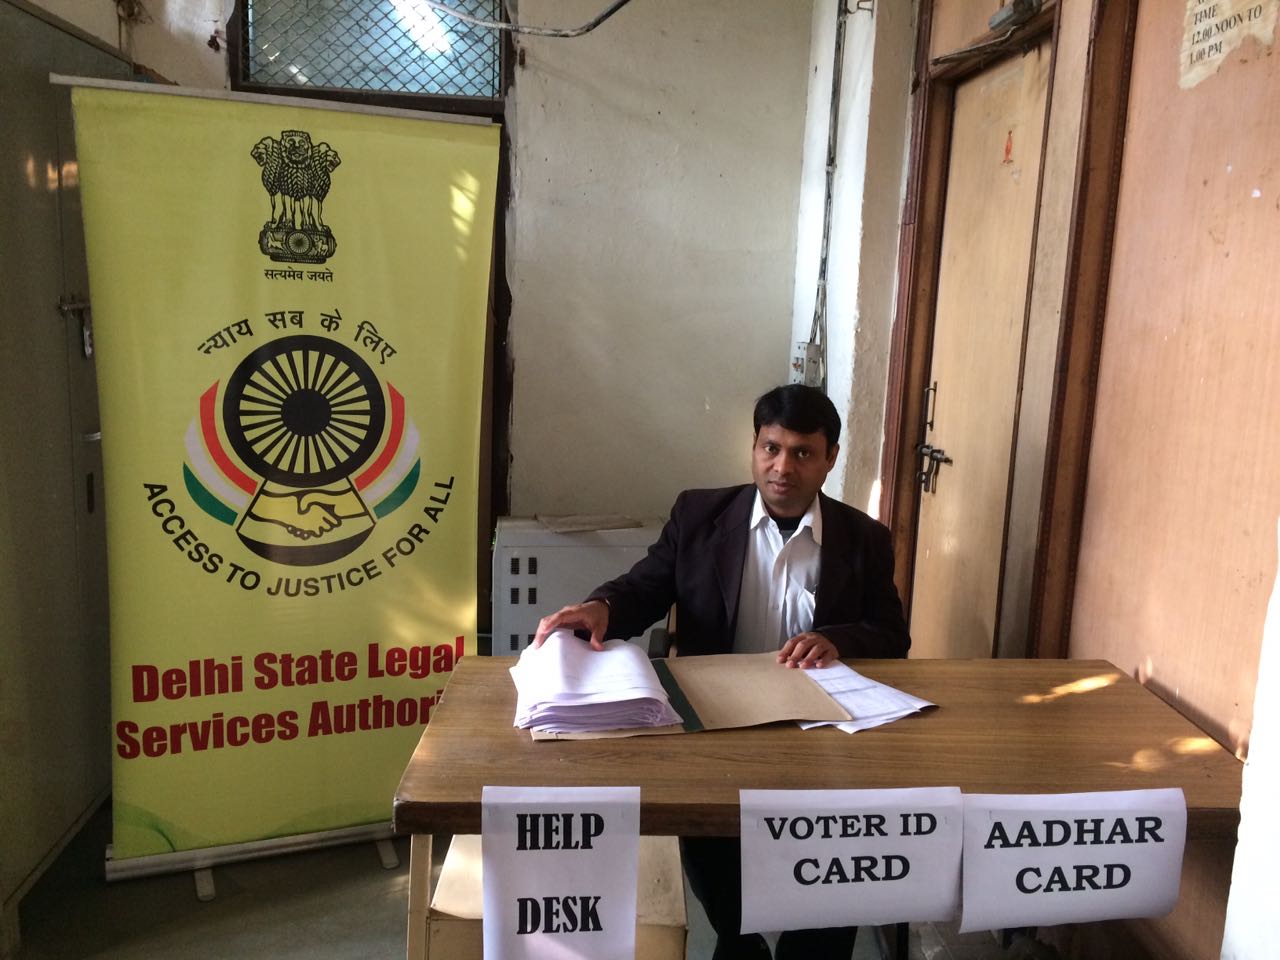 Central District Legal Services Authority organised a Legal Literacy Camp at SDM Office (Central District) Tis Hazari Courts.